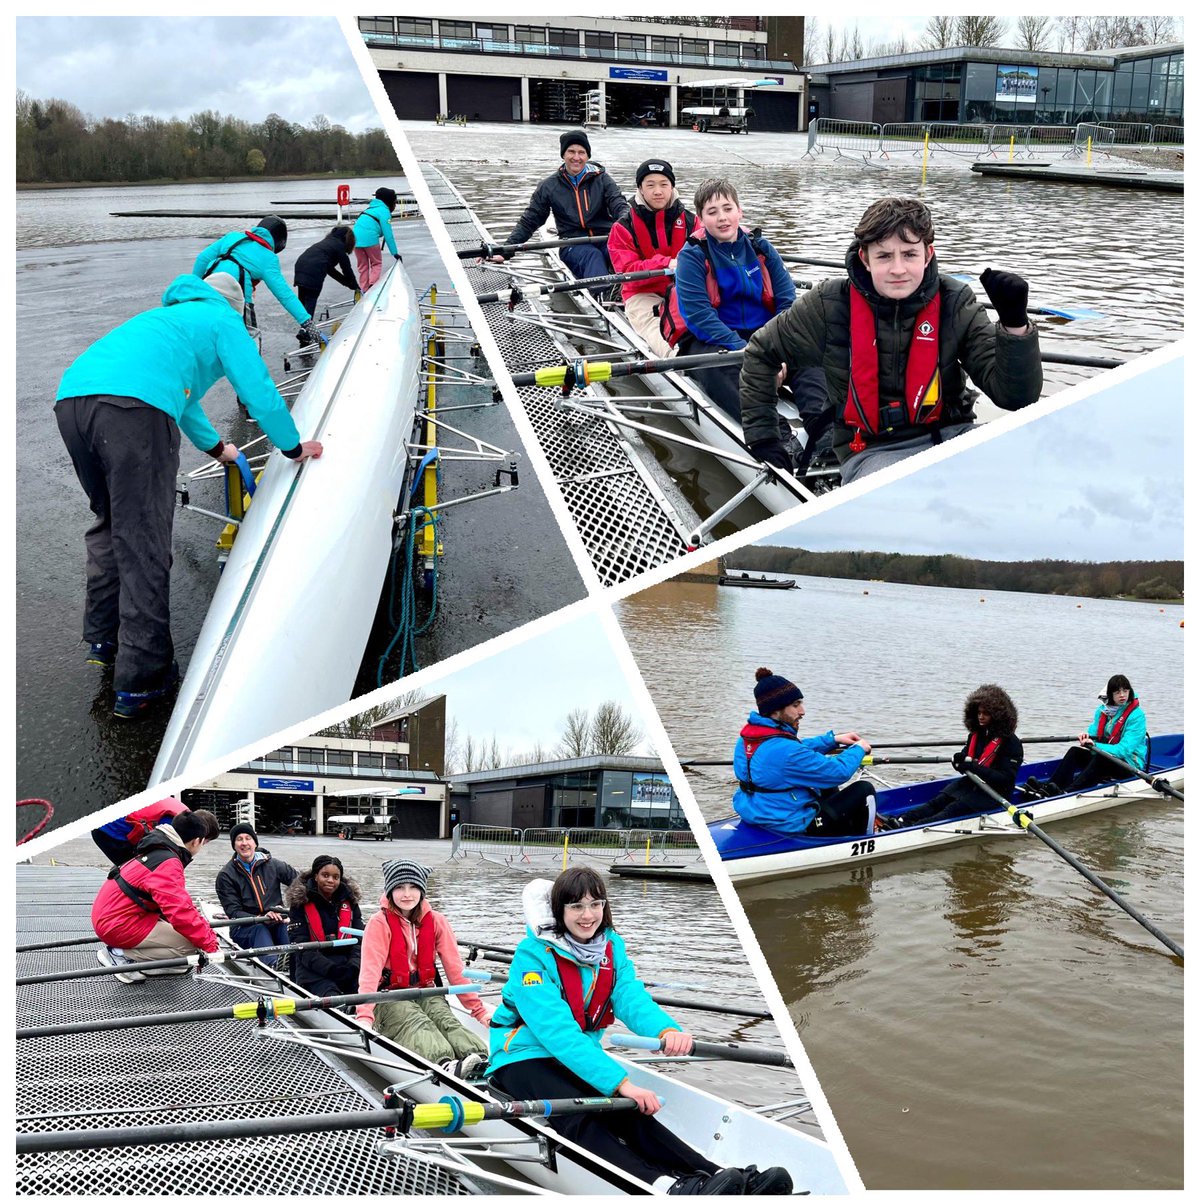 Wonderful #CommunityRowing teamwork & progress today from all our amazing @OLHSMotherwell crew who are now all rowing together in crew boats and showing some brilliant rowing skills. @NLActiveSchools @SP_RC1 @ScottishRowing @active_nl